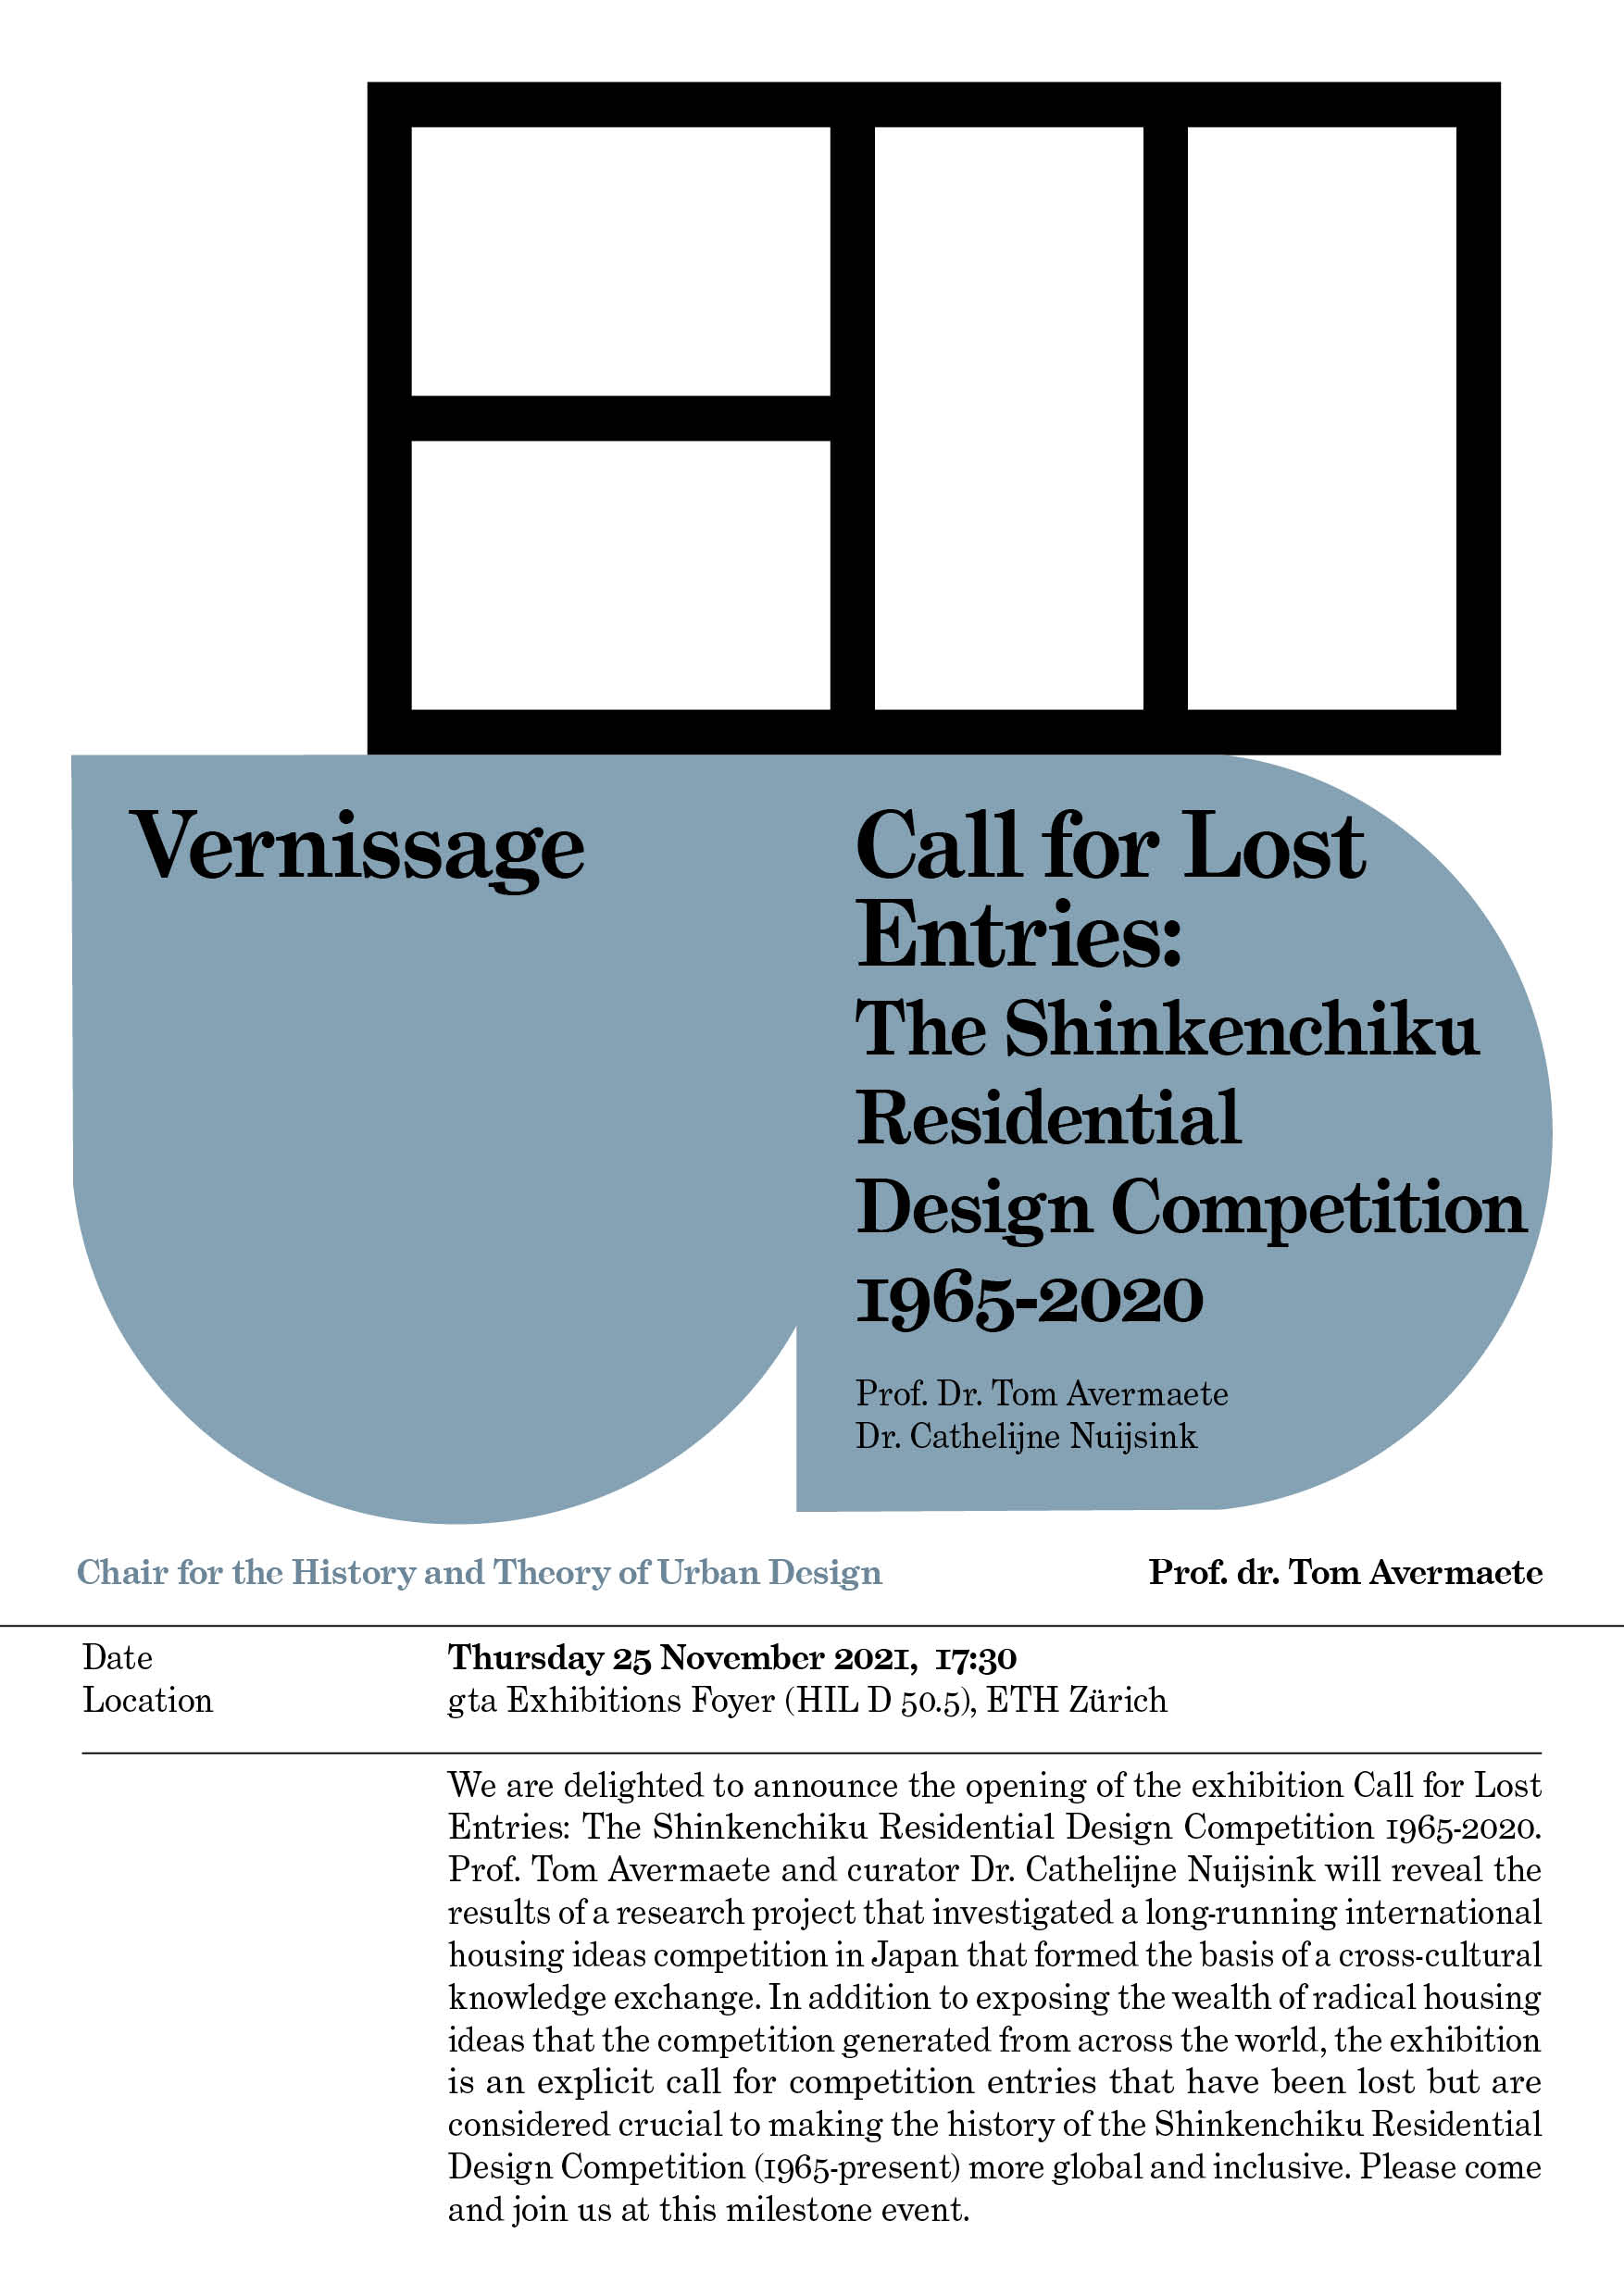 Call for Lost Entries: The Shinkenchiku Residential Design Competition 1965-2020